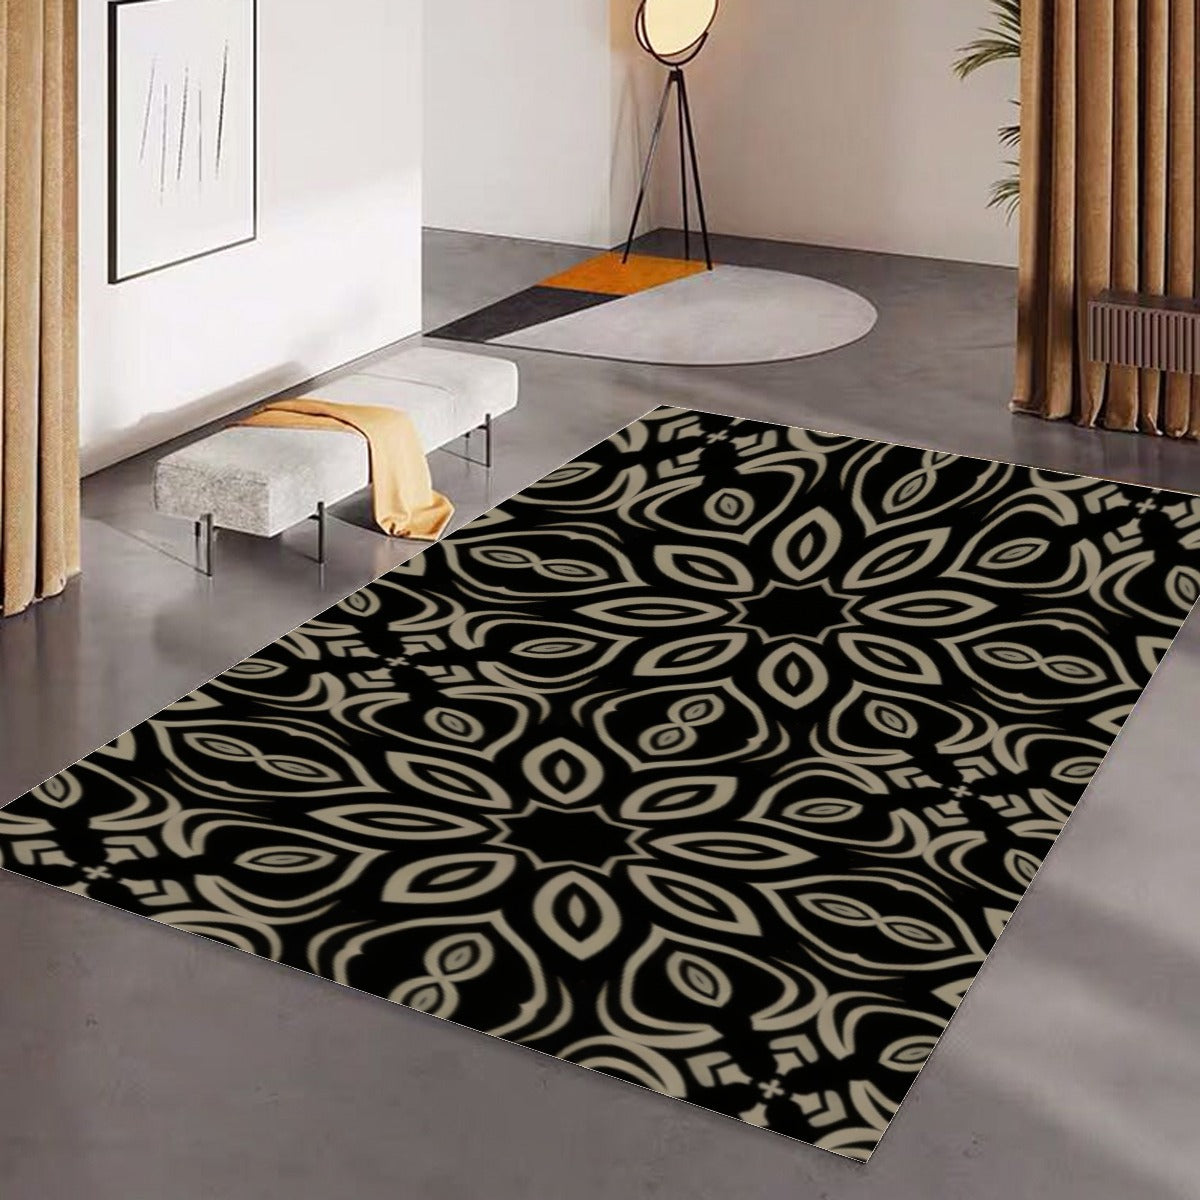 Vampire Art Goth Psychedelic Foldable Rectangular Floor Mat, 4 sizes up to 274 cm